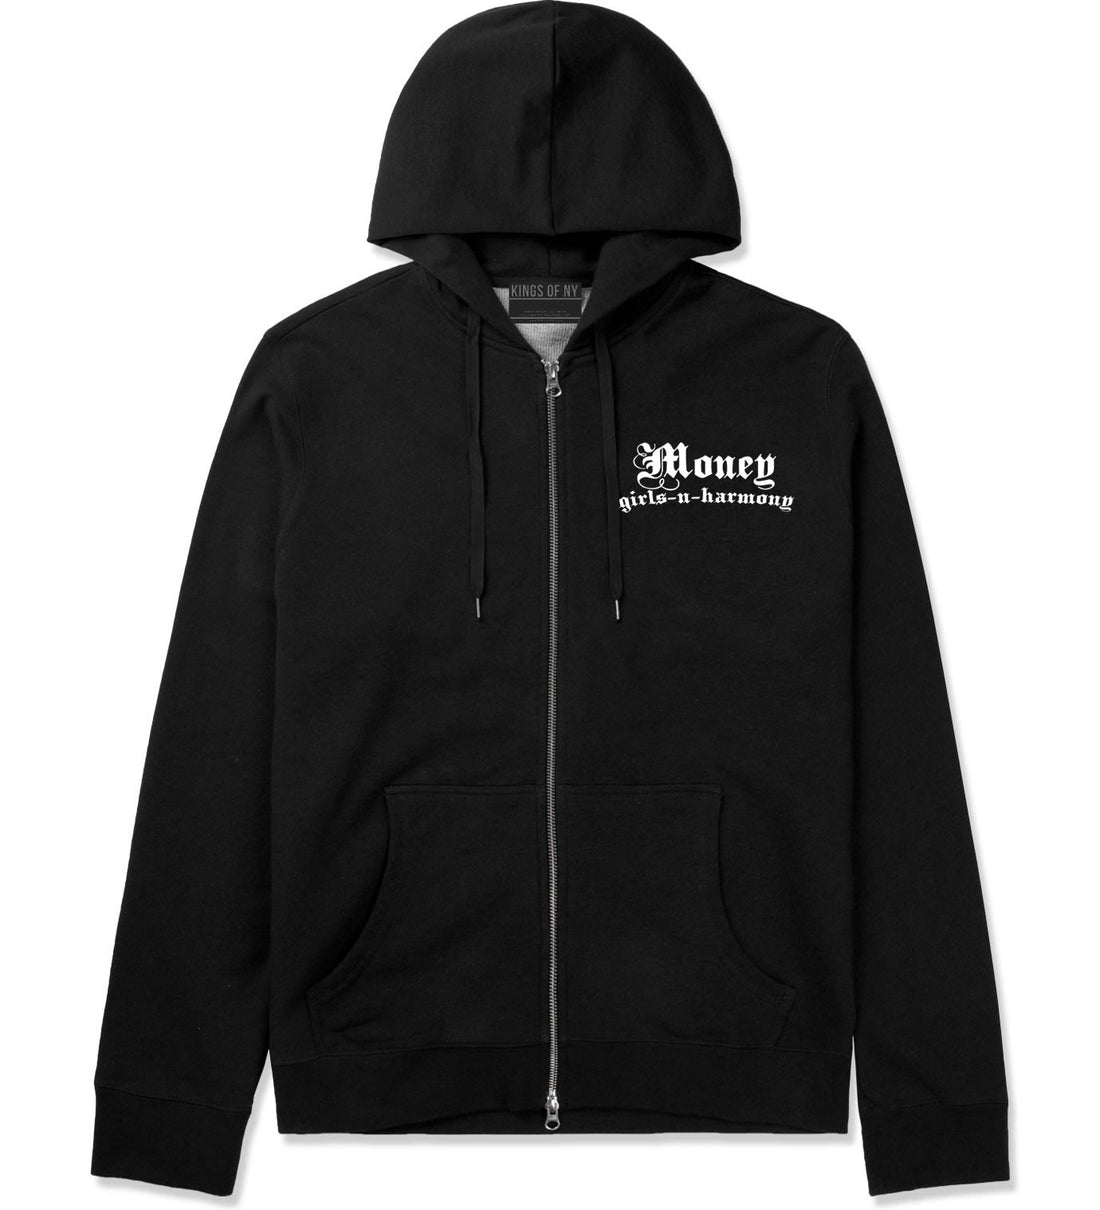 Money Girls And Harmony Zip Up Hoodie in Black By Kings Of NY